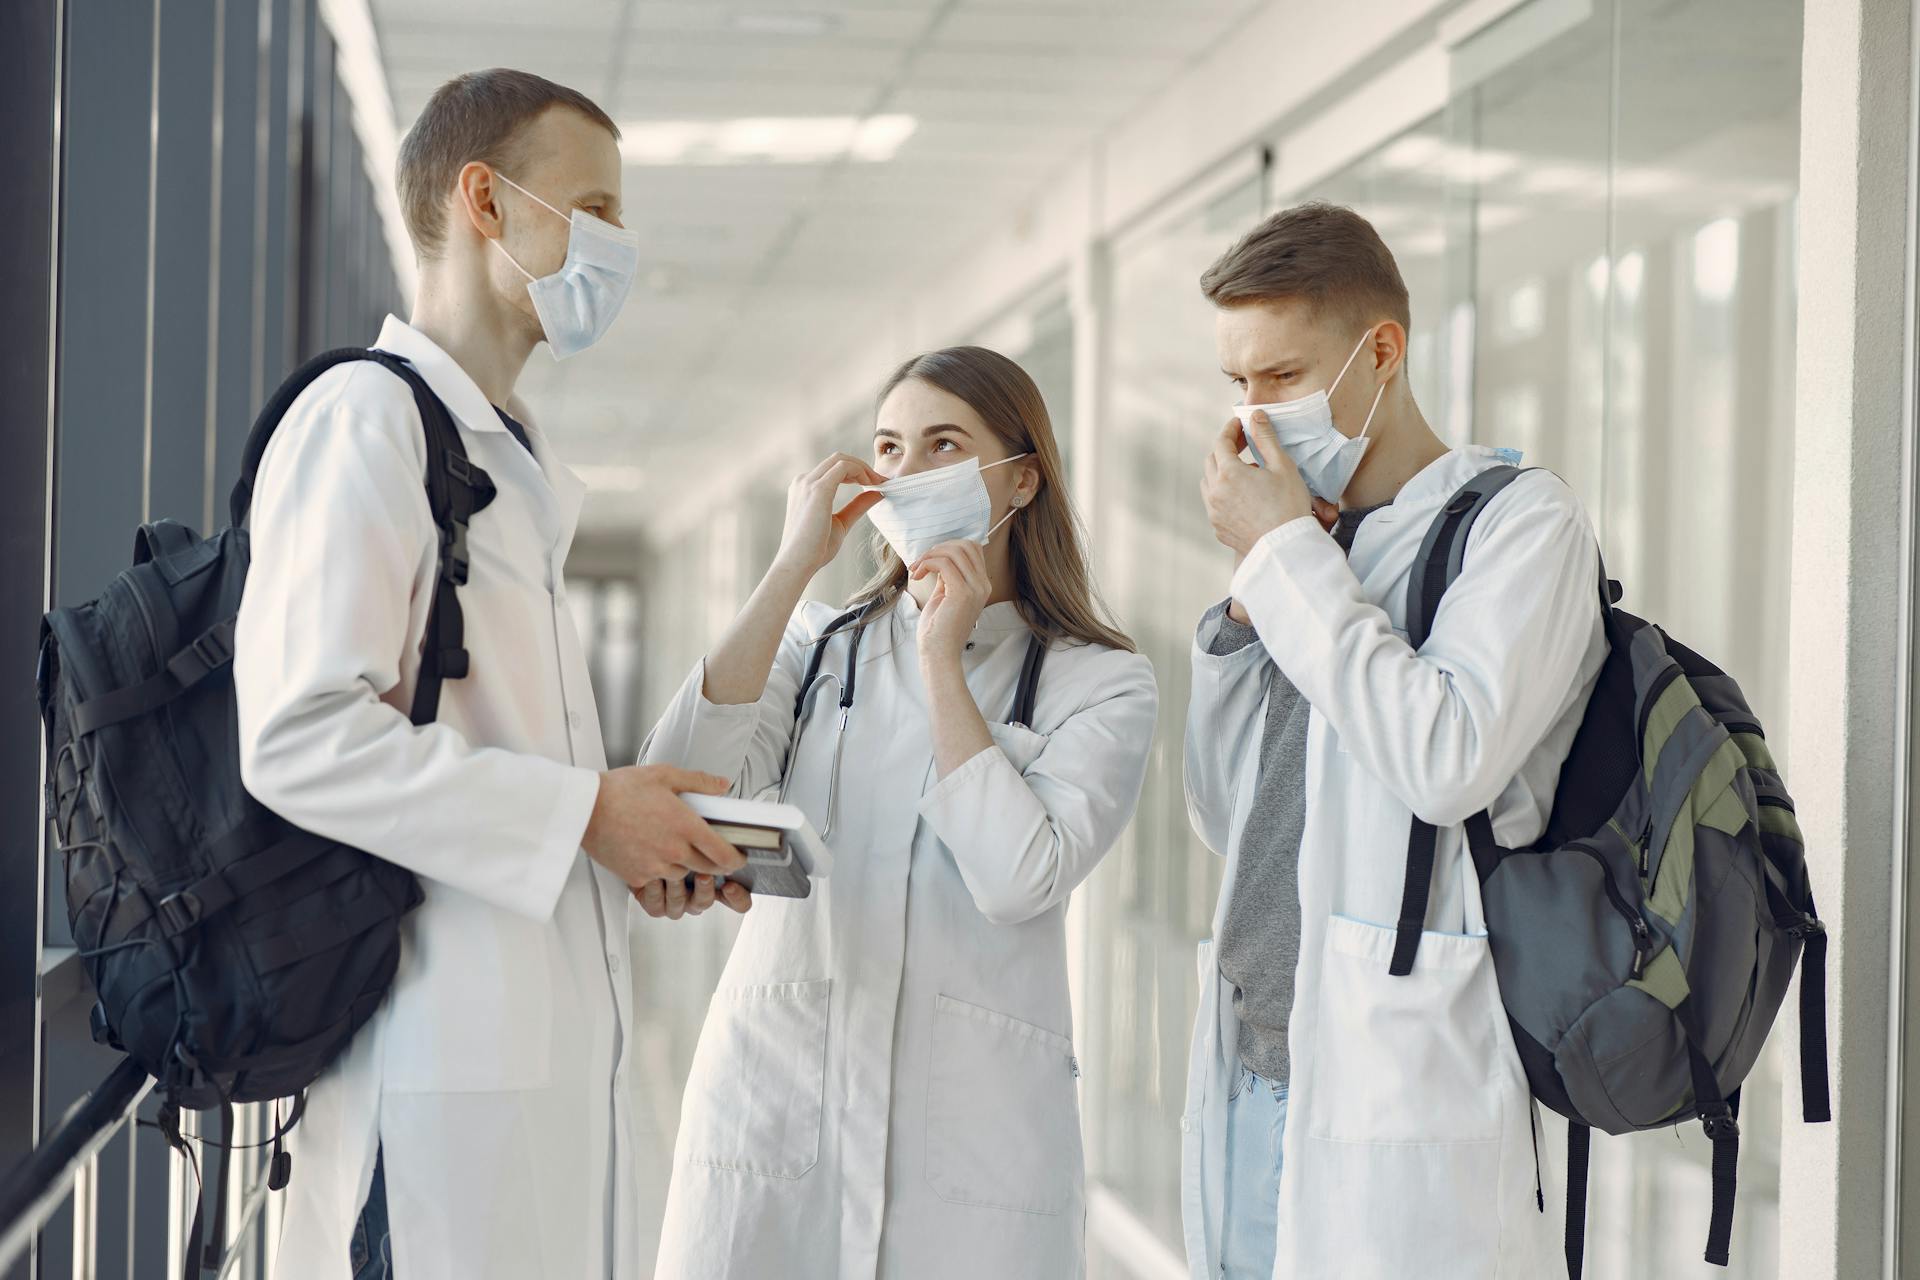 A group of medical students | Source: Pexels